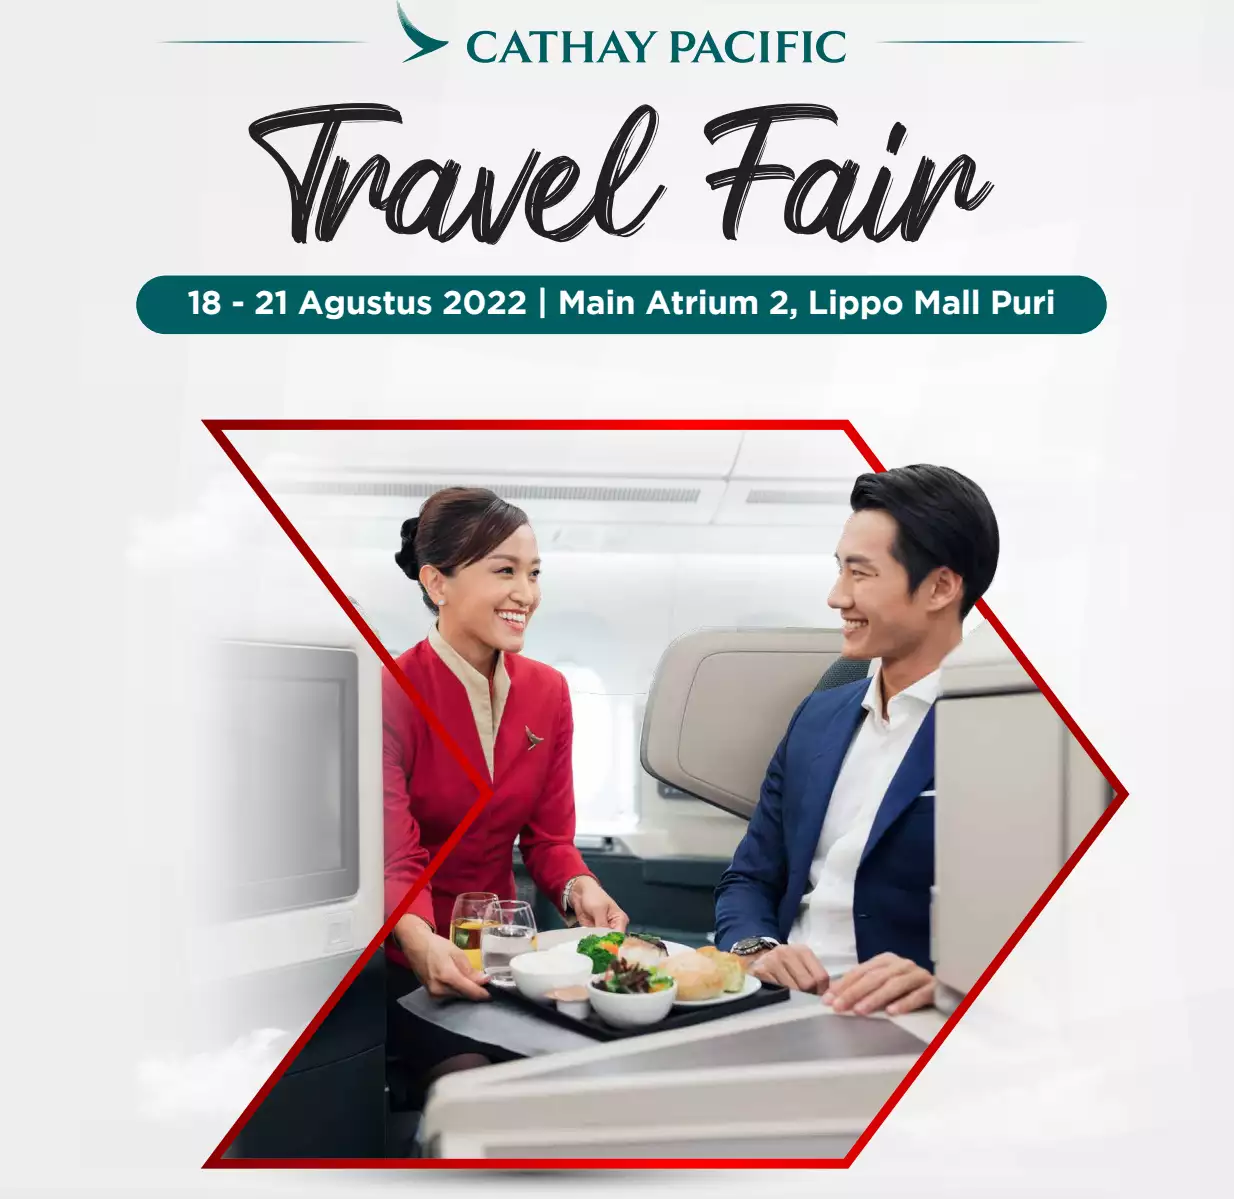 Buckle Up for Adventure: Cathay Pacific Booking for the Adventurous Soul